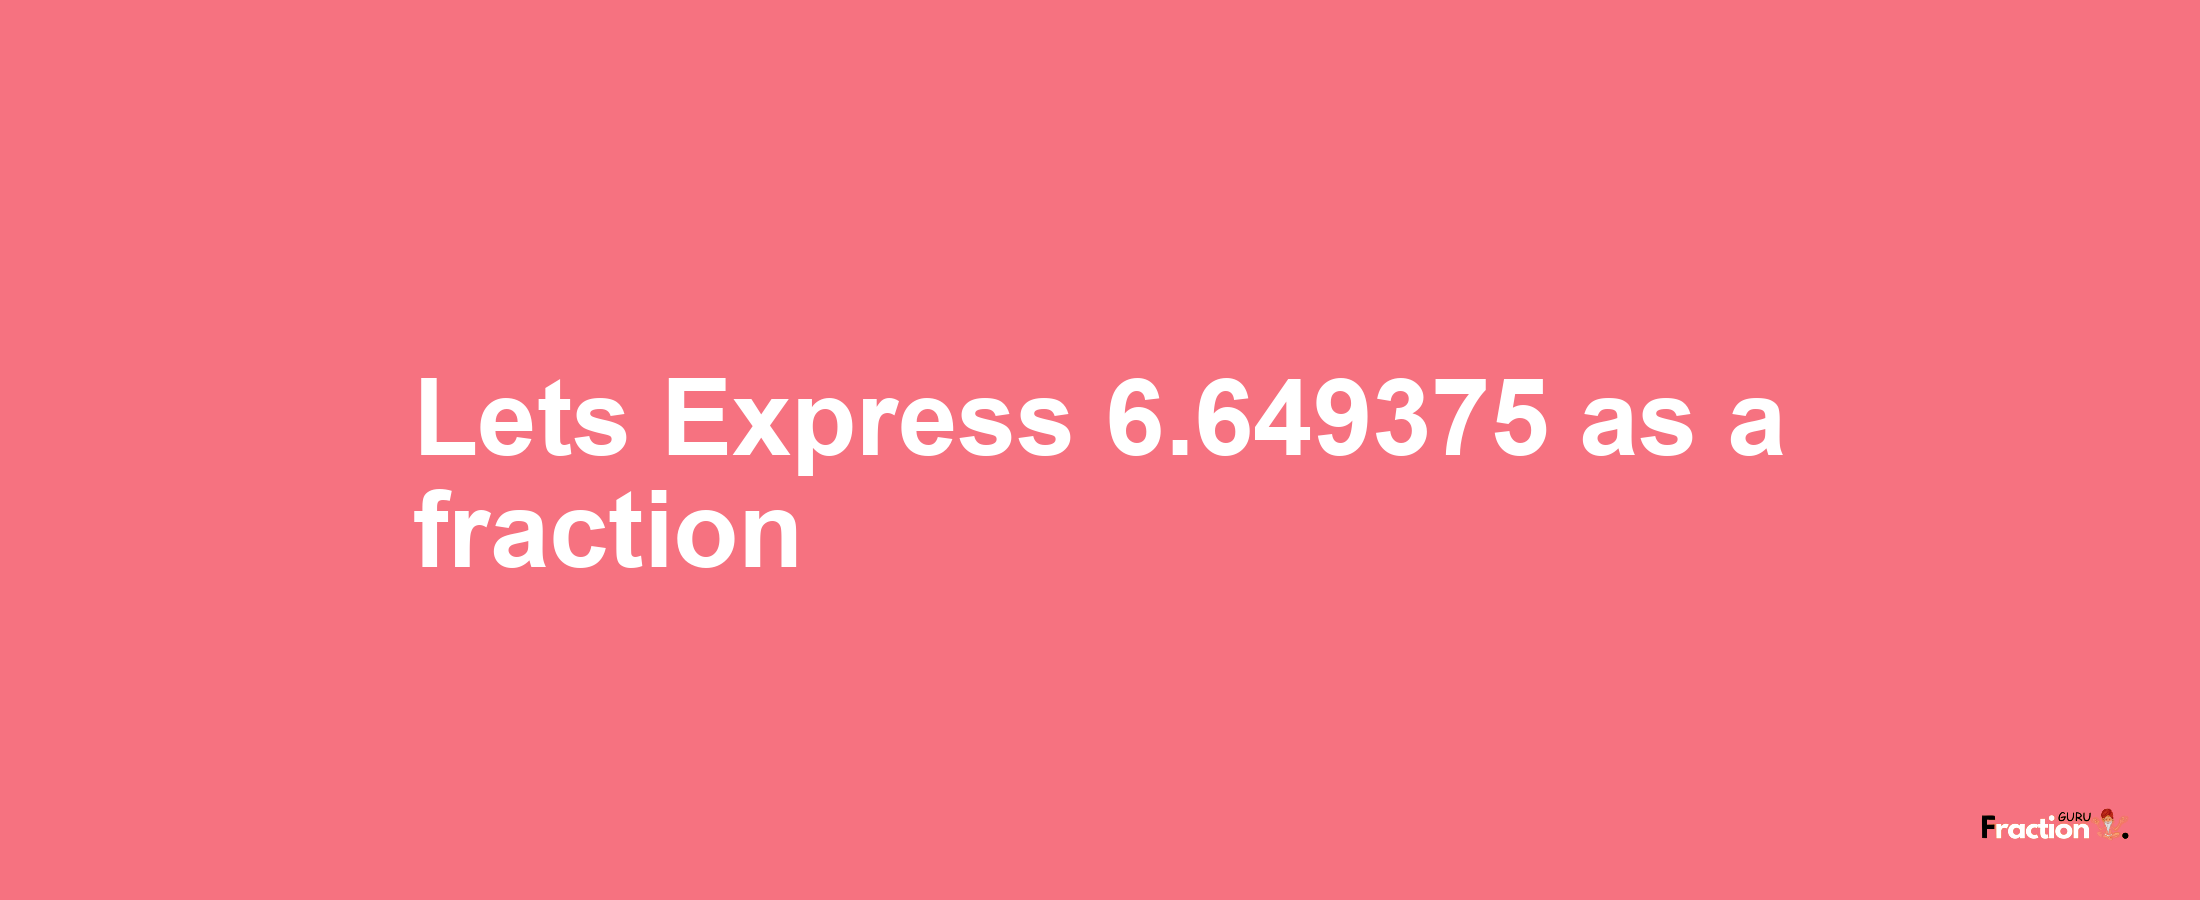 Lets Express 6.649375 as afraction